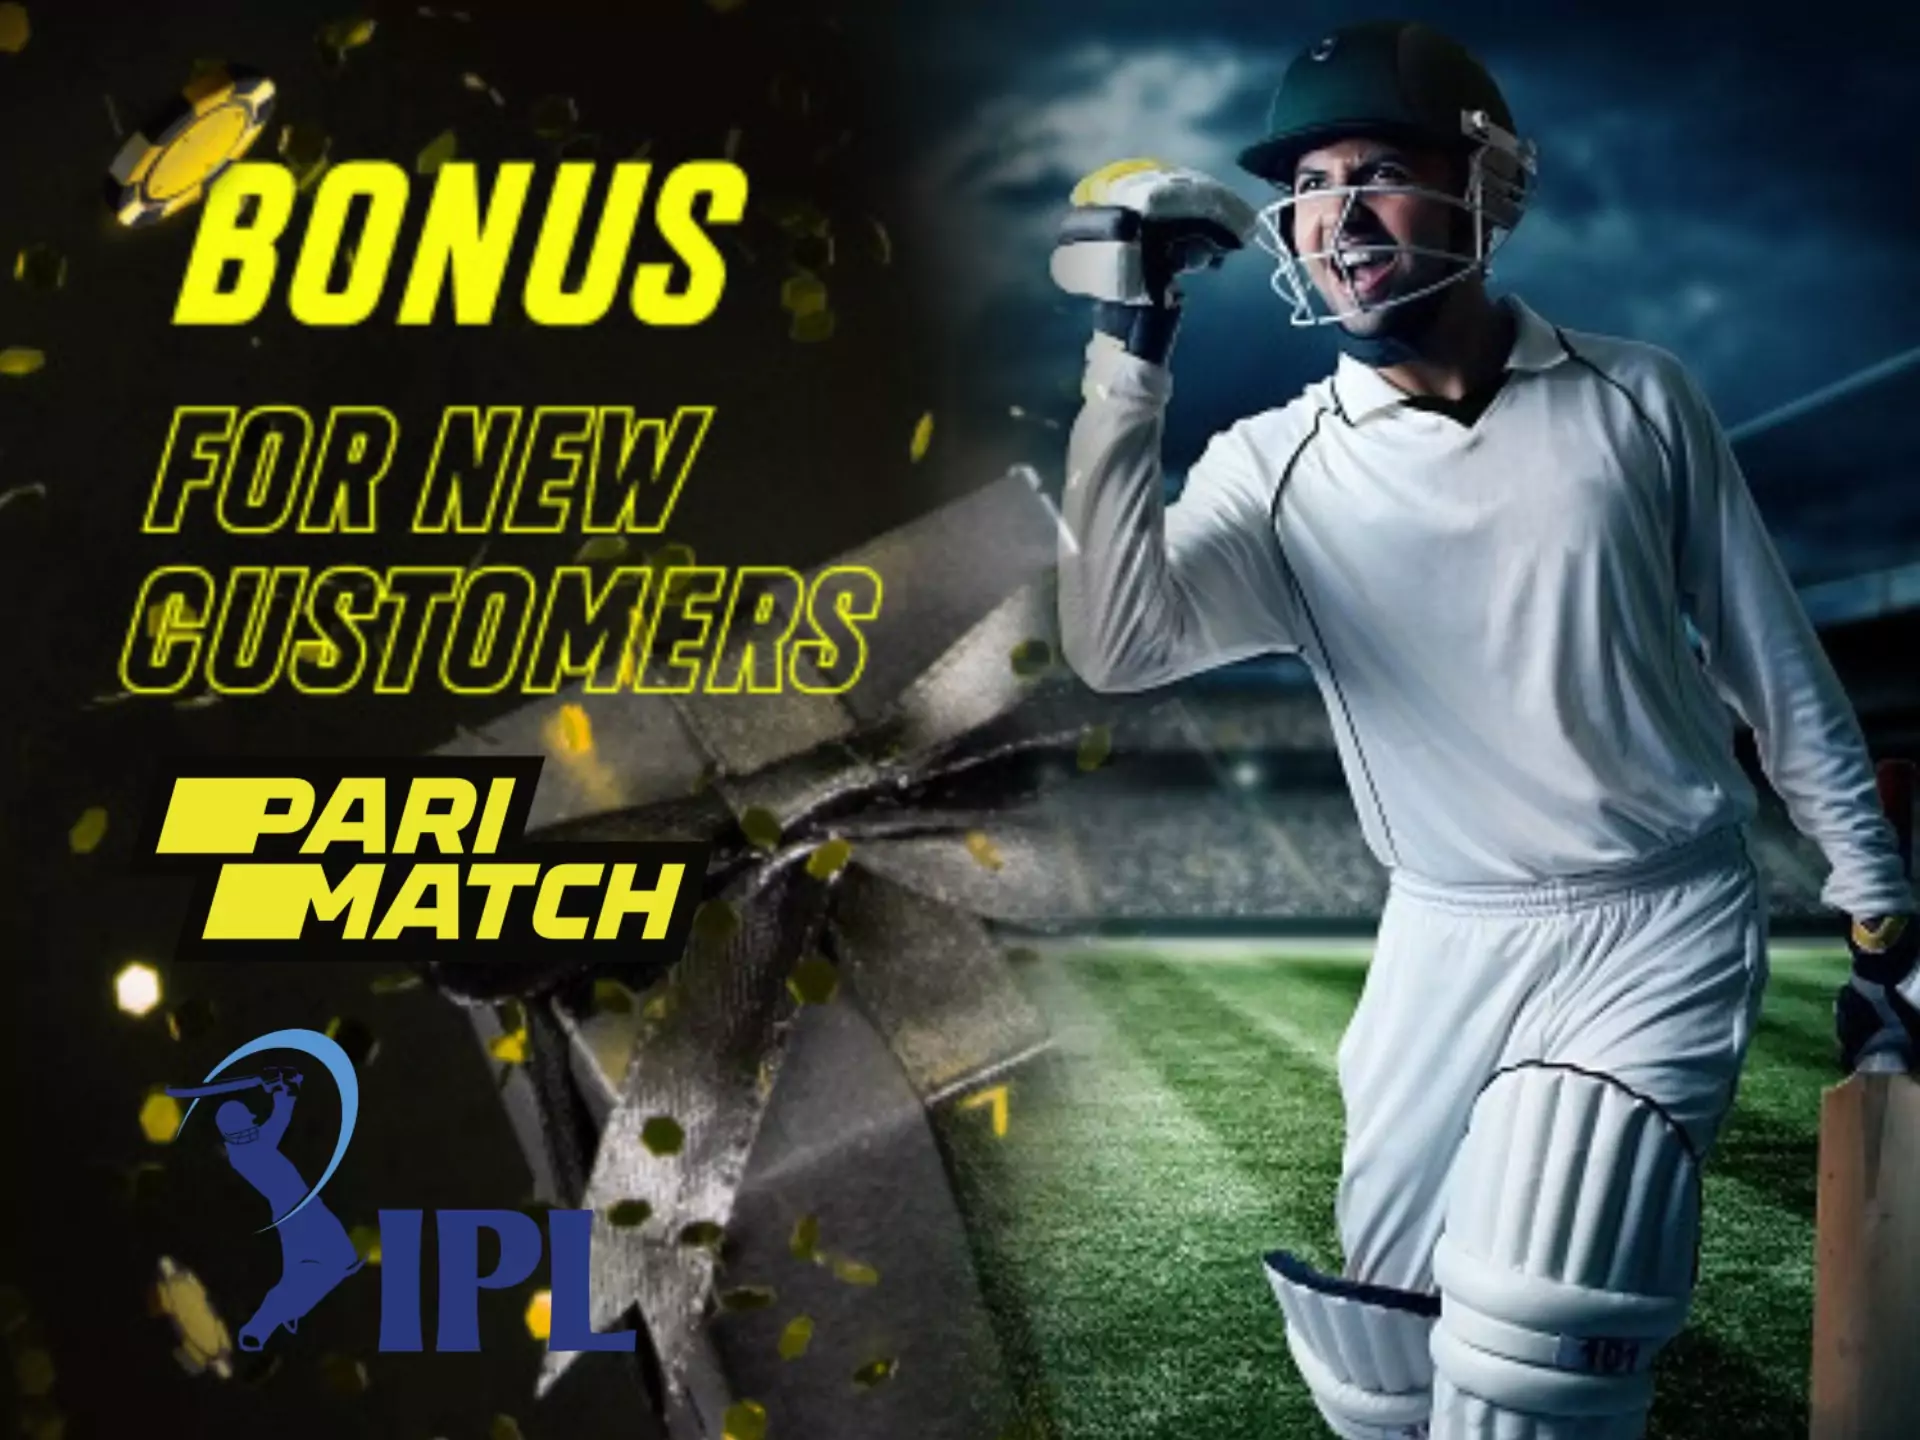 Sign up for Parimatch, get freebet and place them in IPL matches.